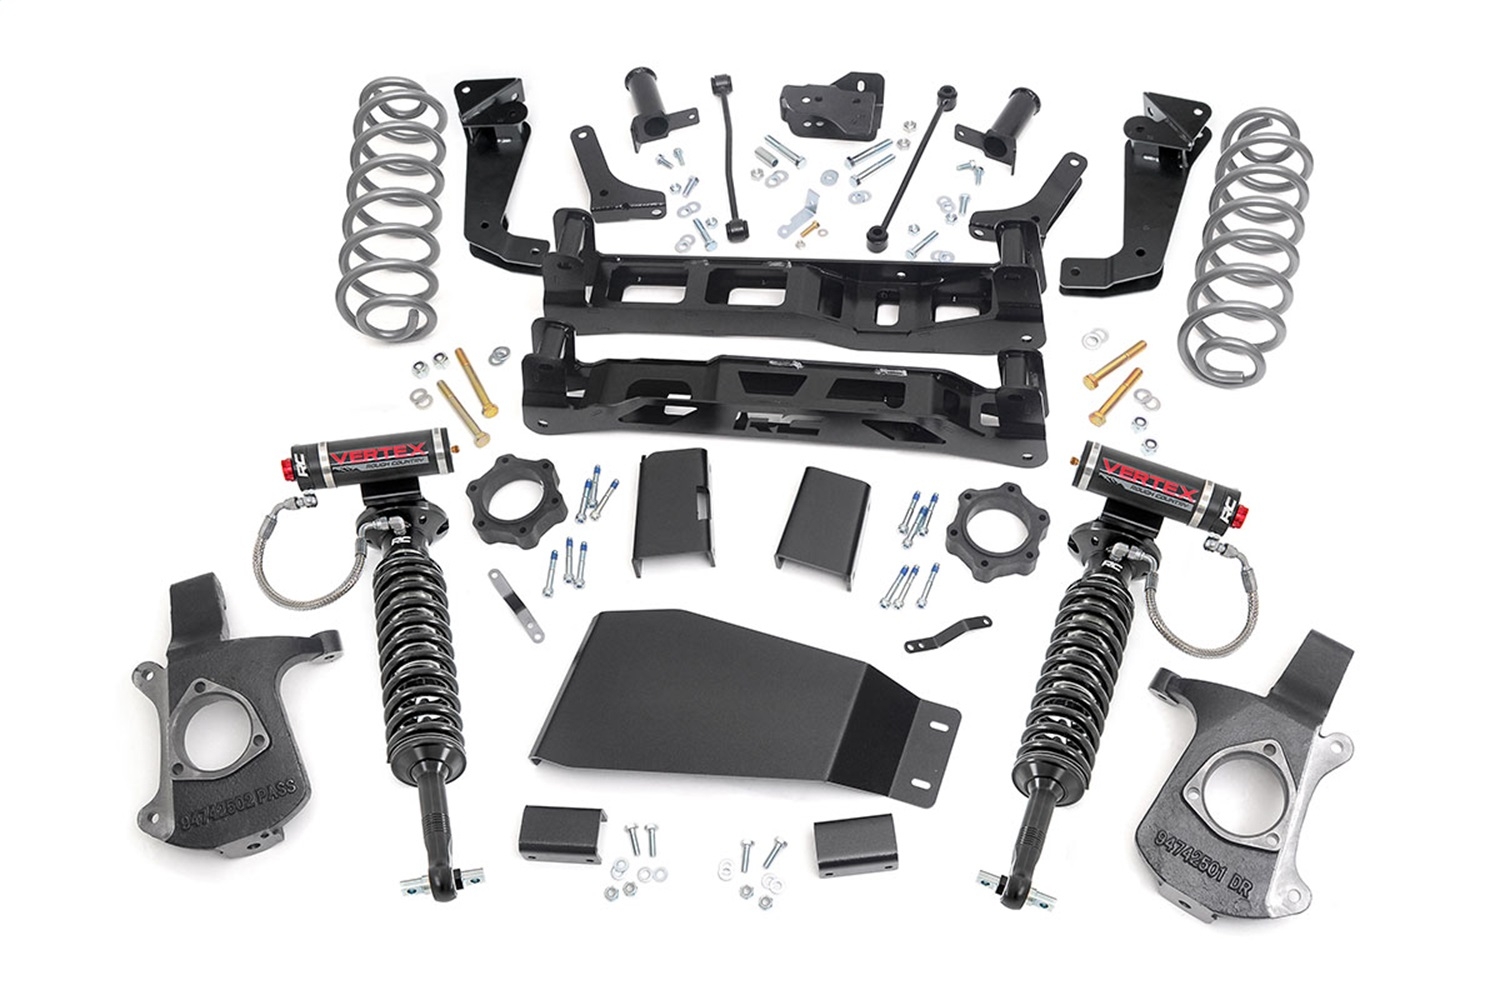 Rough Country 7.5In Gm Suspension Lift Kit W/ Vertex Coilovers (07-13 Tahoe/yukon), Suspension